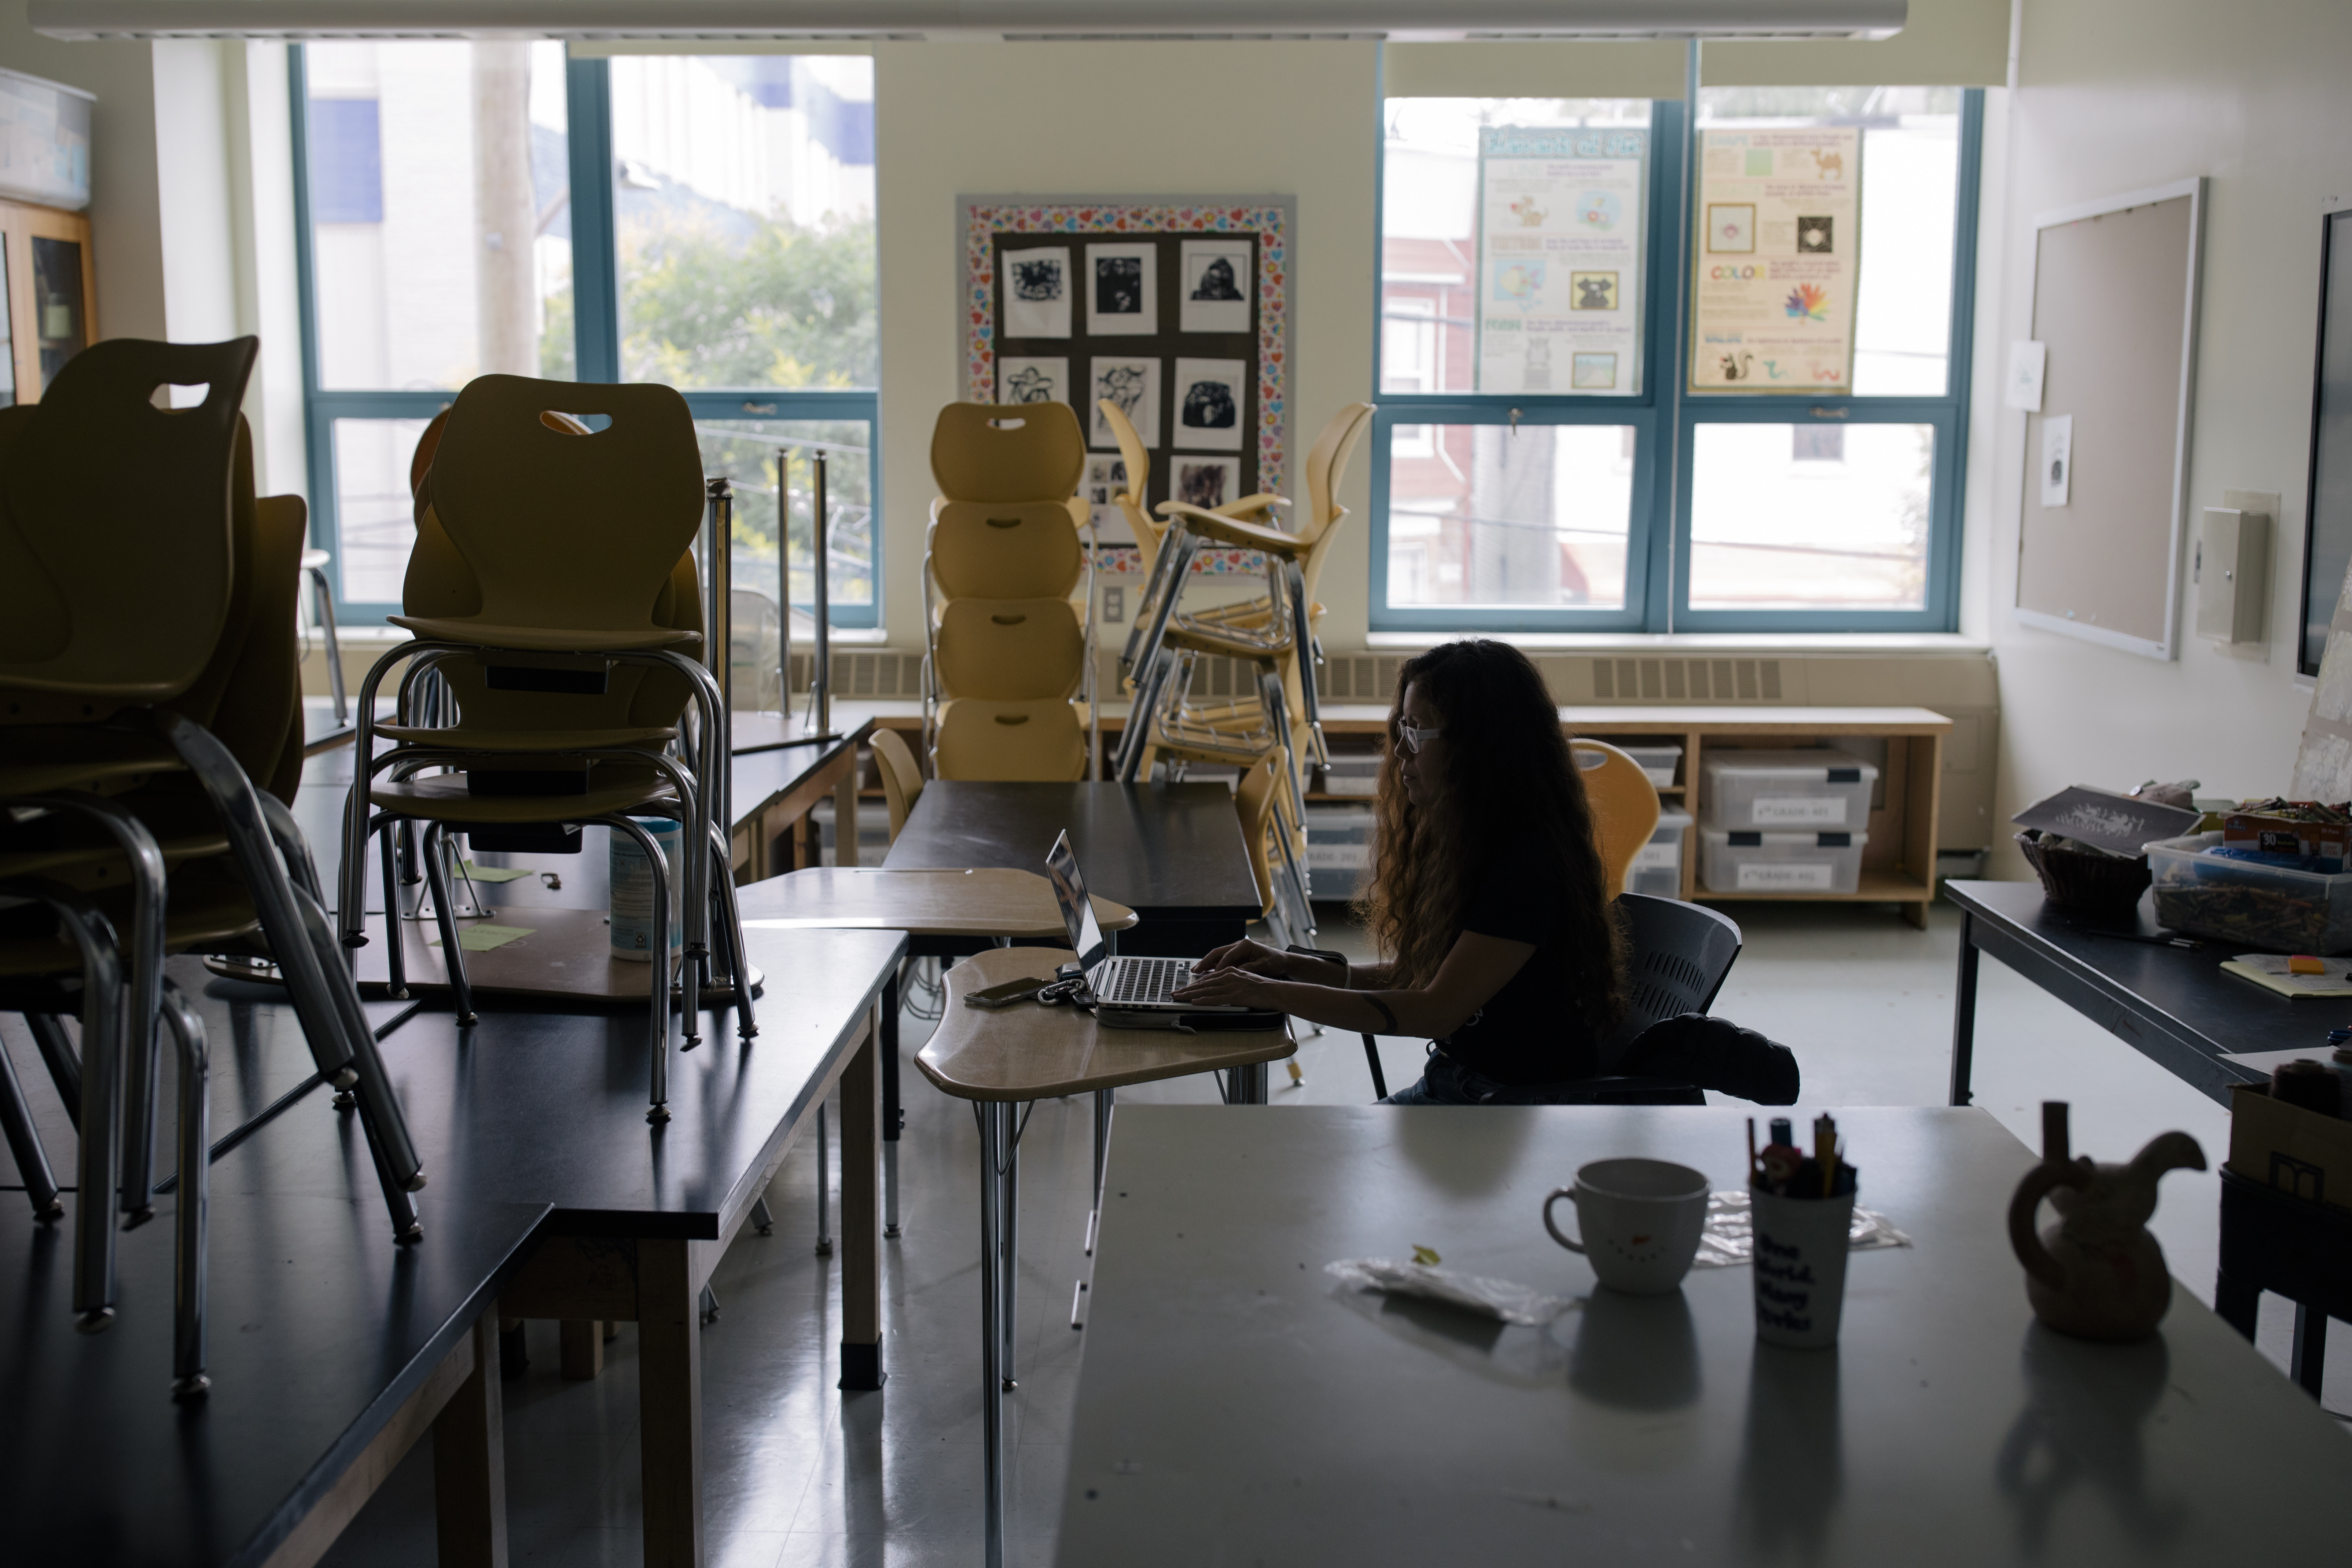 Art teacher Elizabeth Velasquez begins a Zoom class in her empty classroom. The chairs are stacked neatly on desks as she sits at a small desk in the front of the dark classroom.